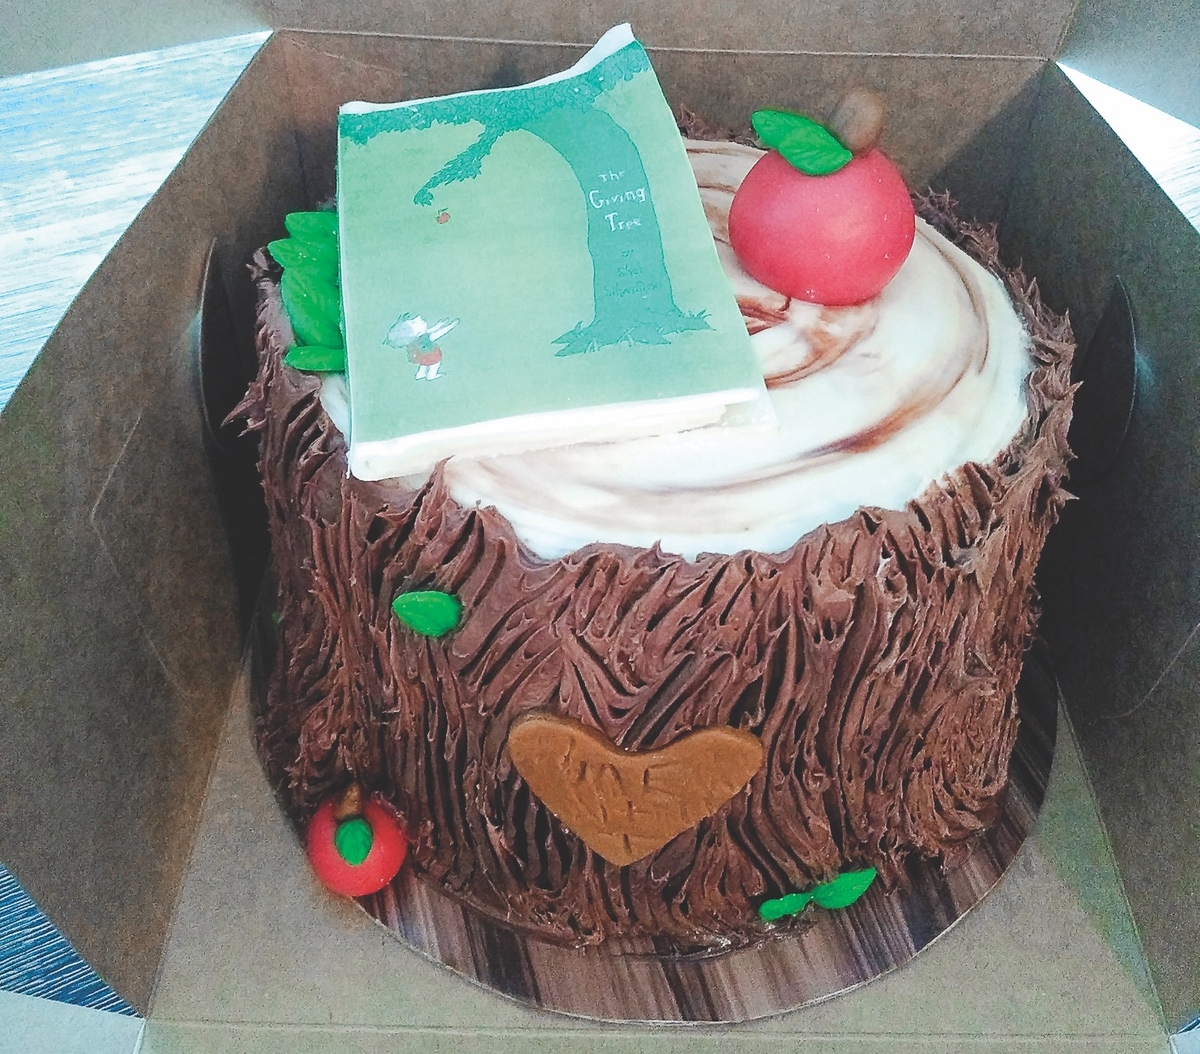 Giving Tree Cake crafted by Sun City cake artist Jo Kinyon Geary. (Photo provided)